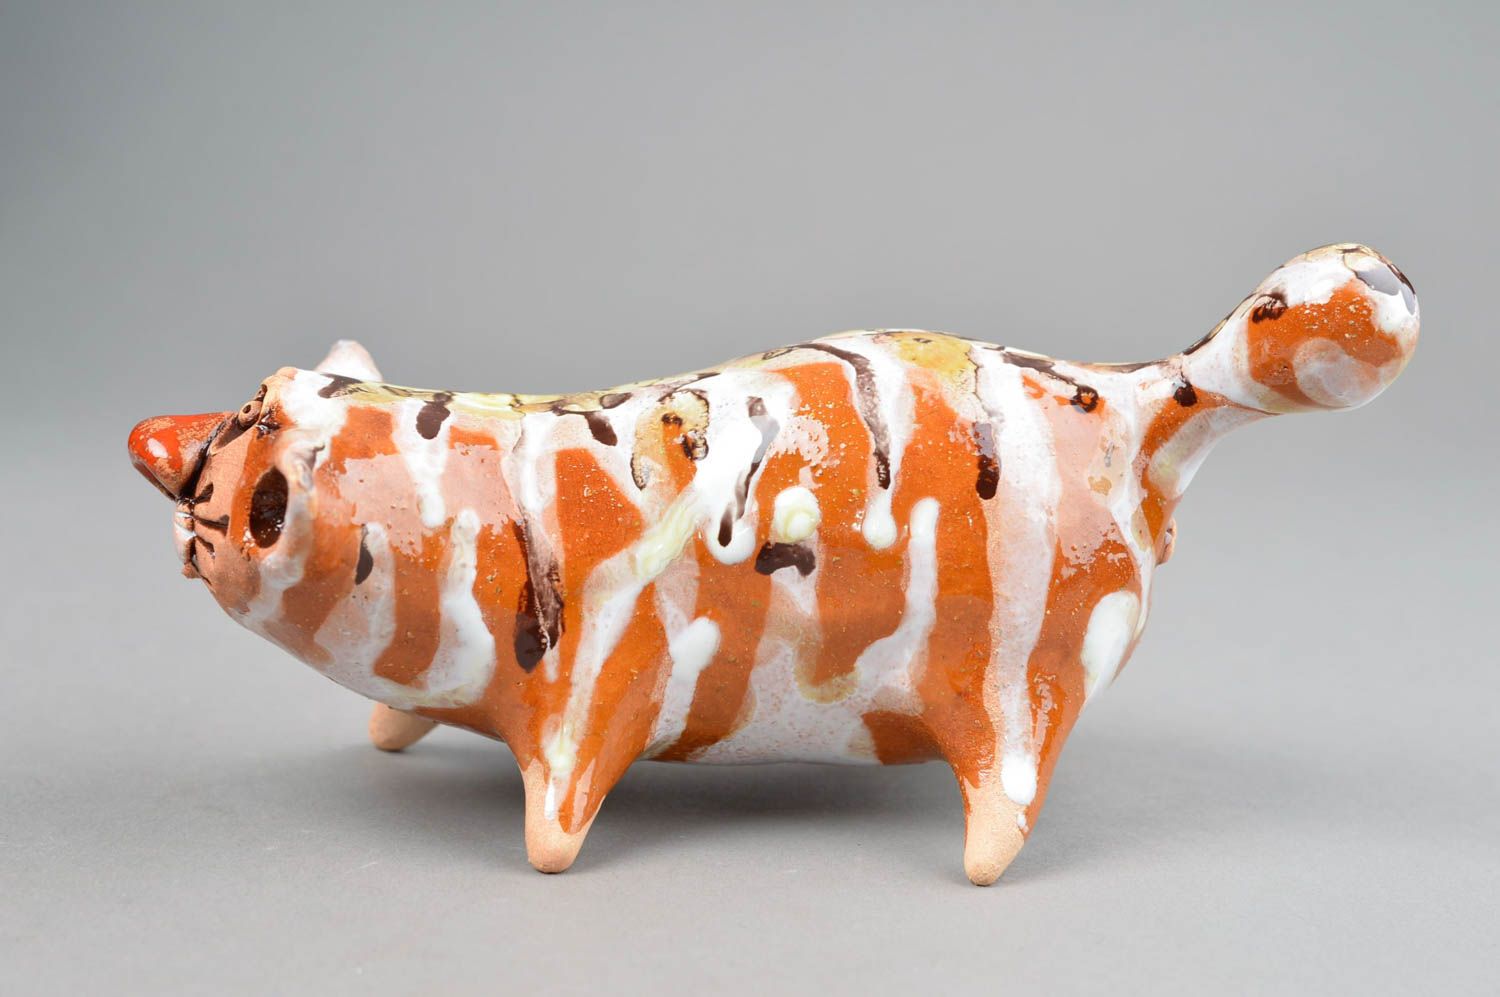 Cat figurines ceramic figurines homemade home decor gifts for cat lovers photo 2